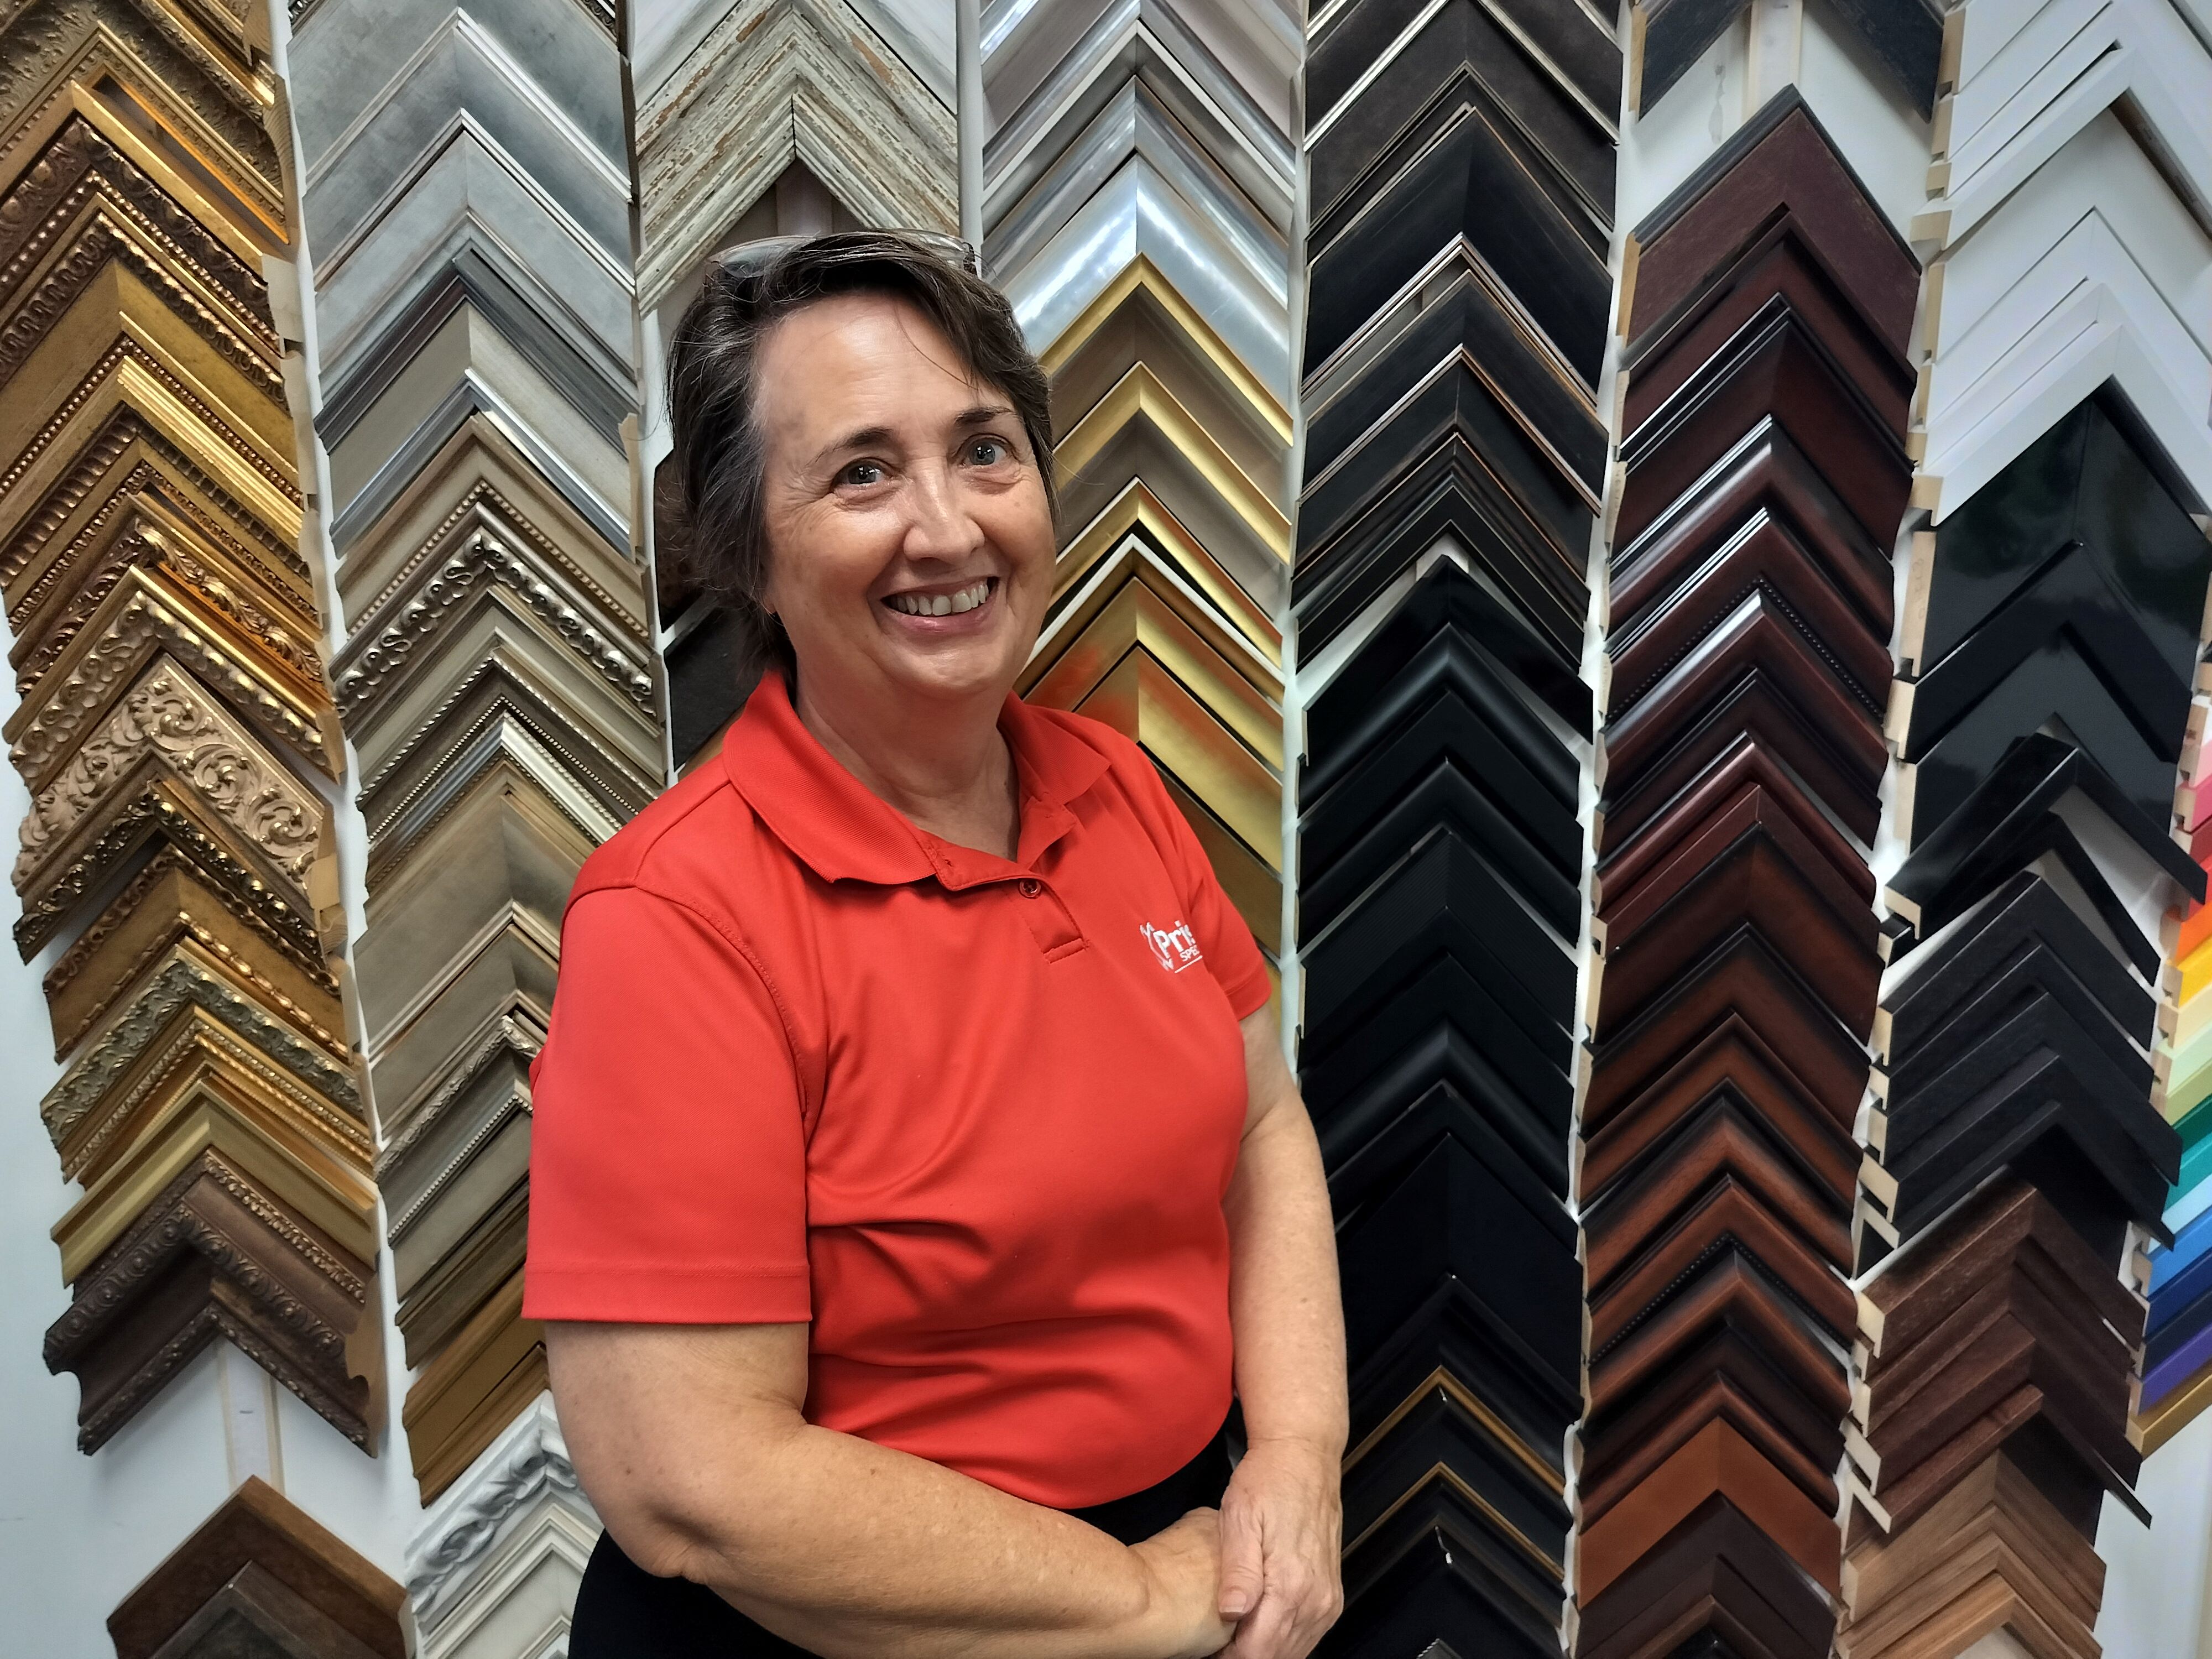 Smiling woman with short gray hair wearing red polo shirt, smiling in front of trim samples on wall is Jennifer Brashear of Prism Specialties